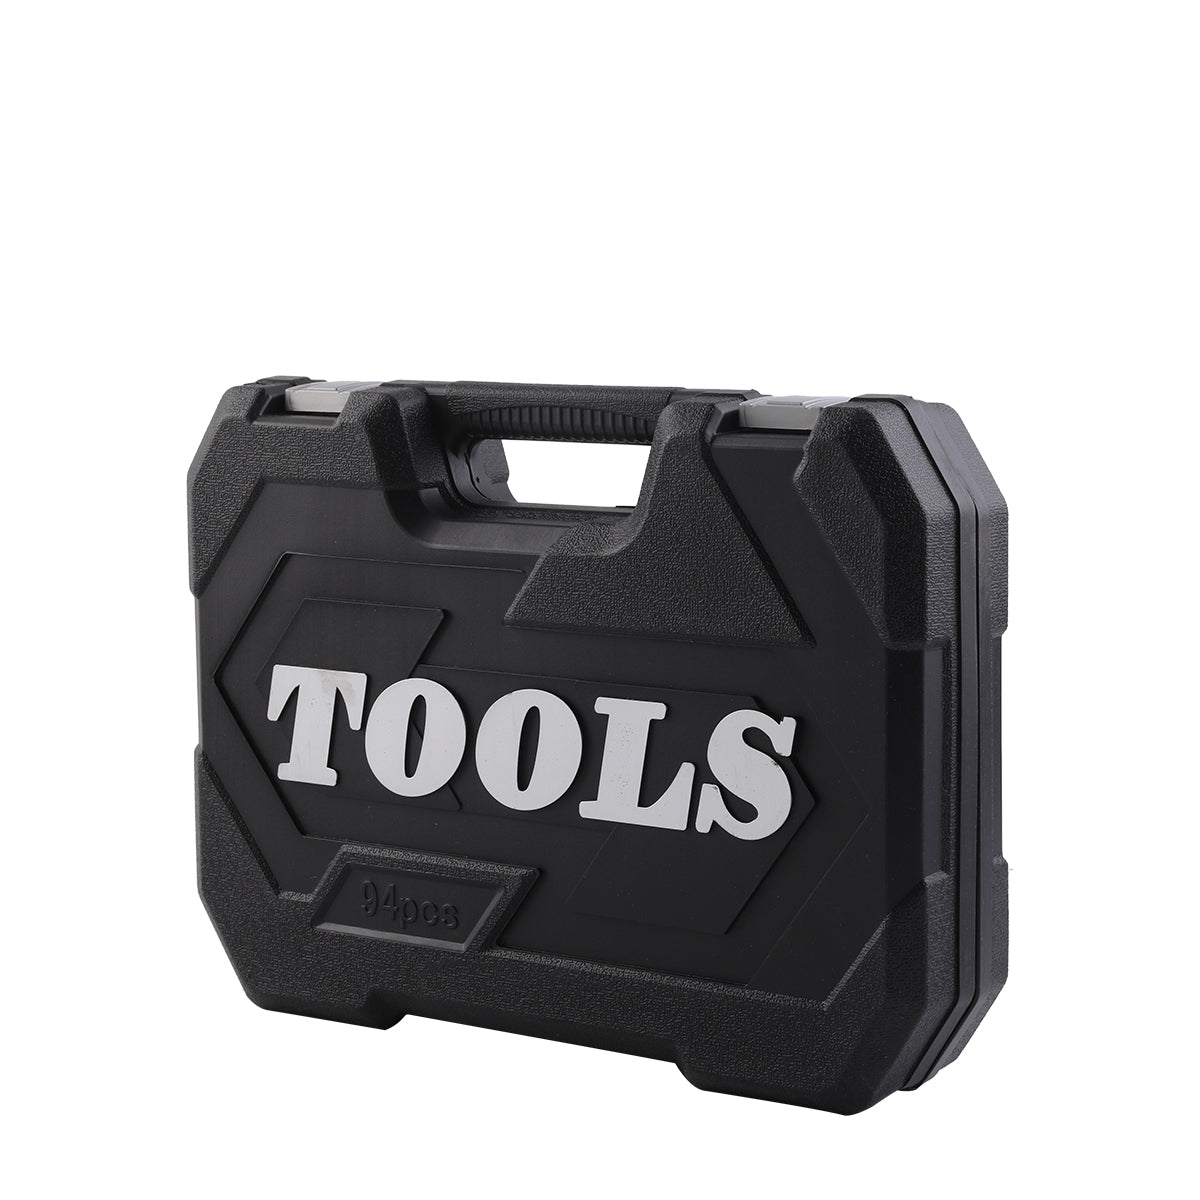 94-Piece Tools Set With Carry Case